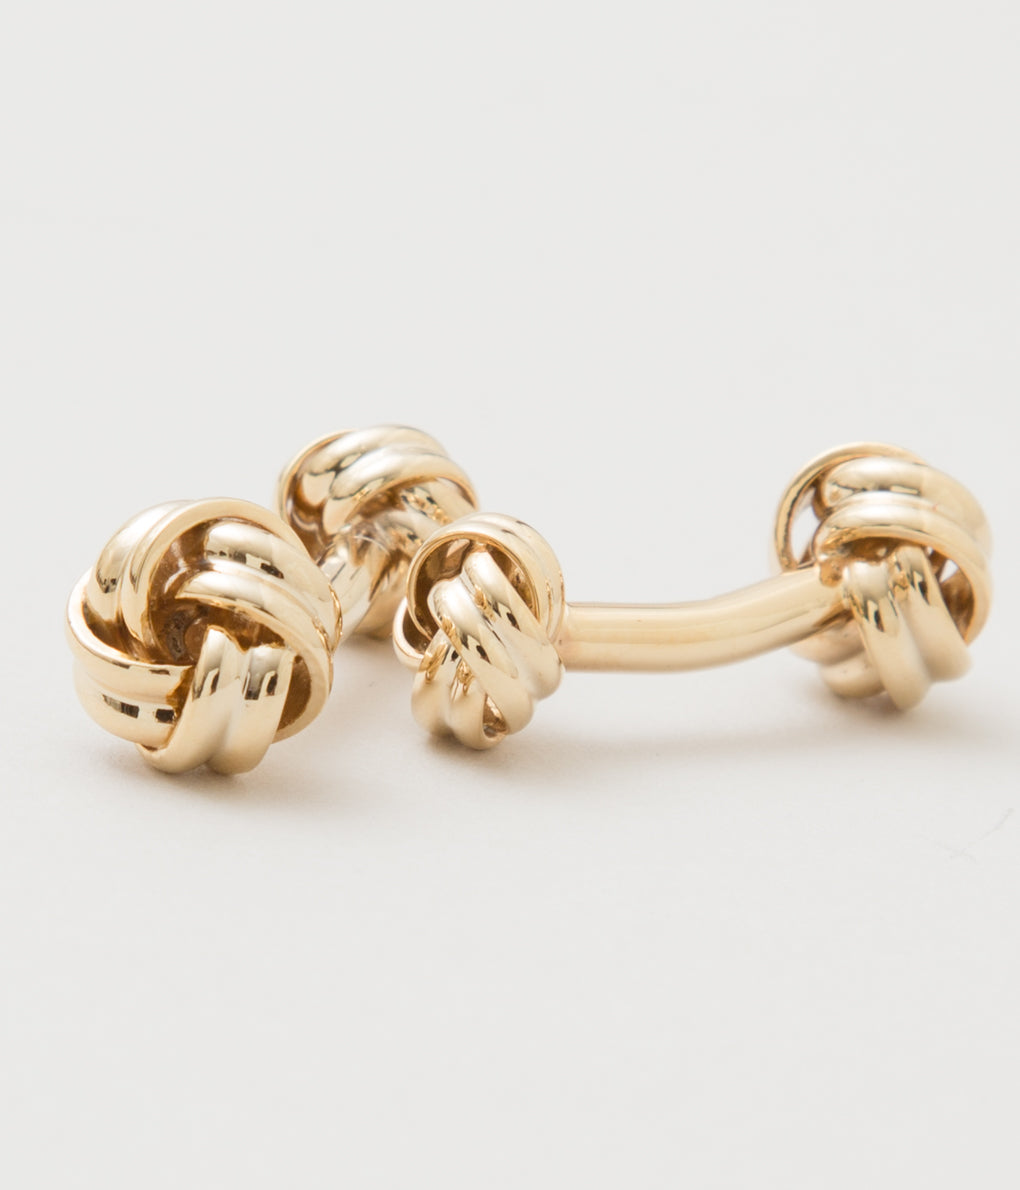 FINE AND DANDY "CUFF LINKS KNOT" (GOLD)